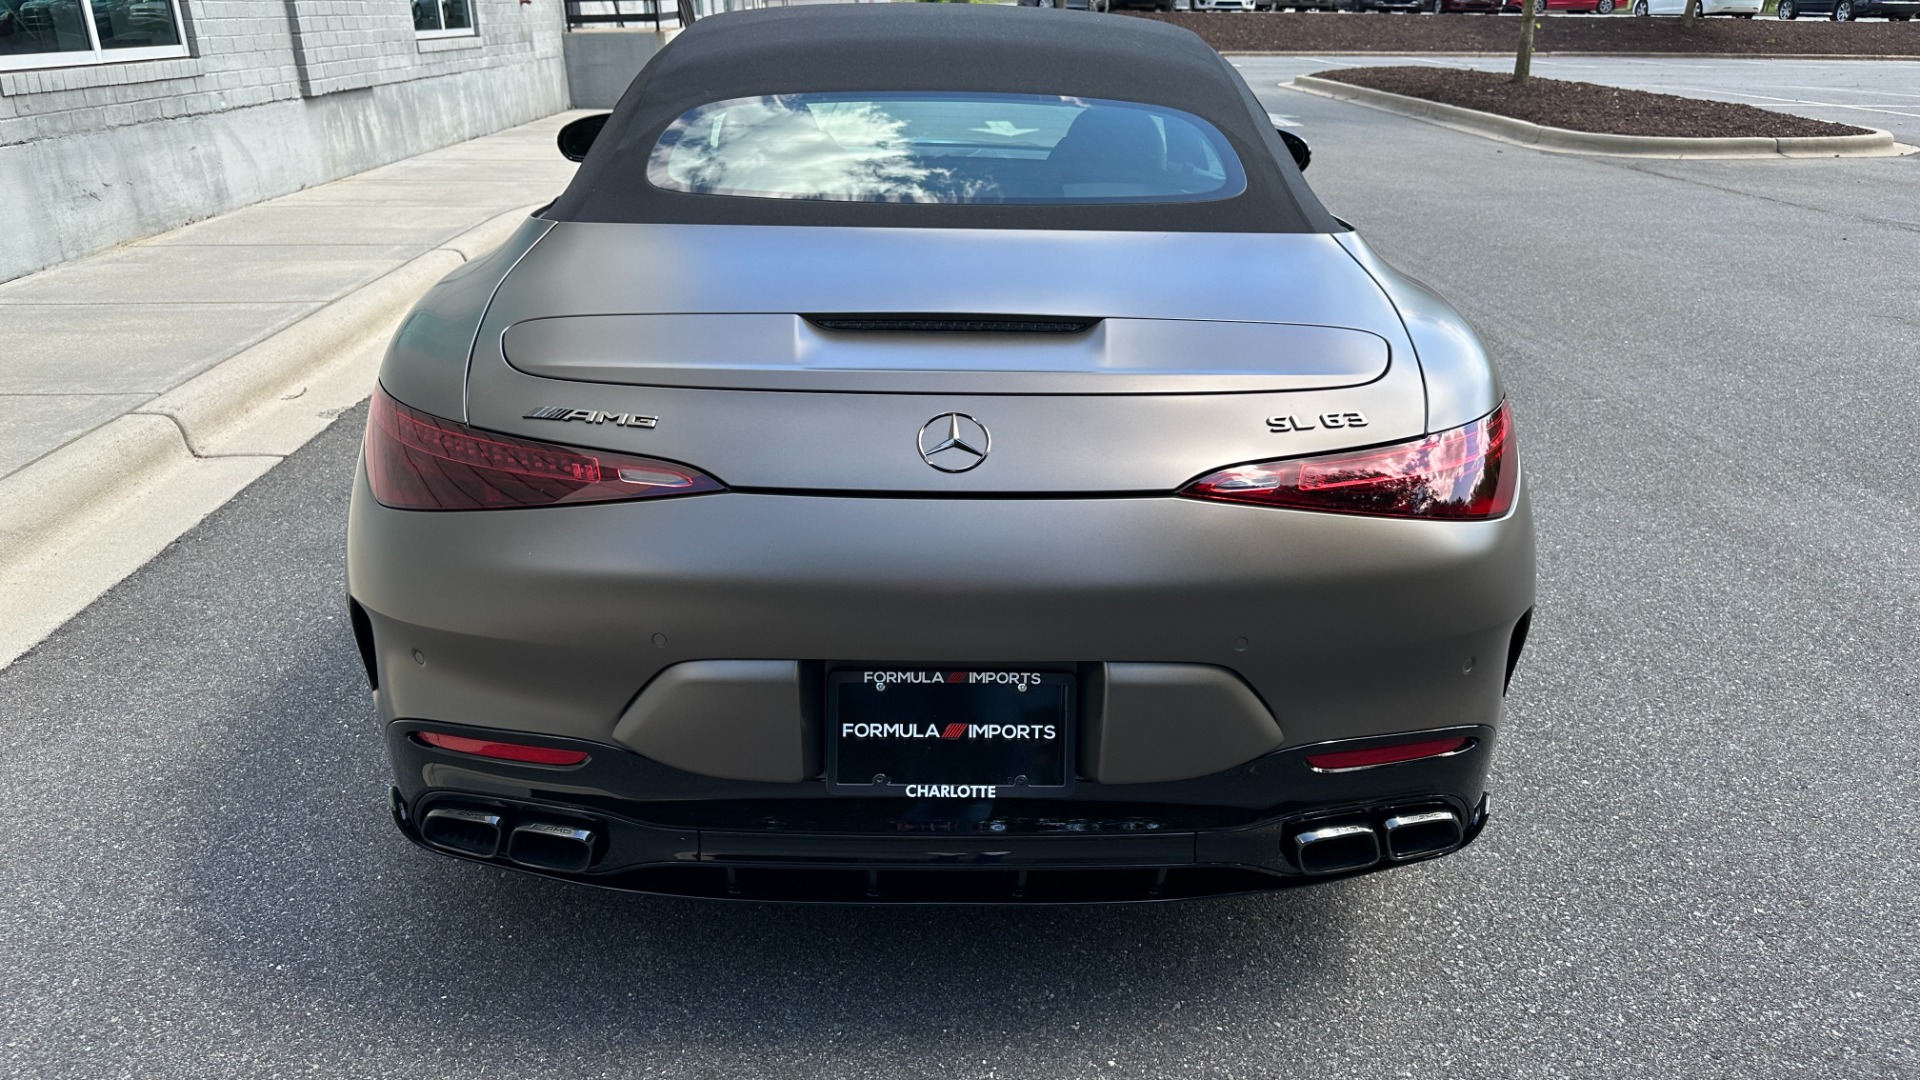 Used 2022 Mercedes-Benz SL AMG SL63 ROADSTER / PERF LINE / AMG NIGHT PKG / CARBON FIBER / SATIN PAINT for sale $179,000 at Formula Imports in Charlotte NC 28227 8